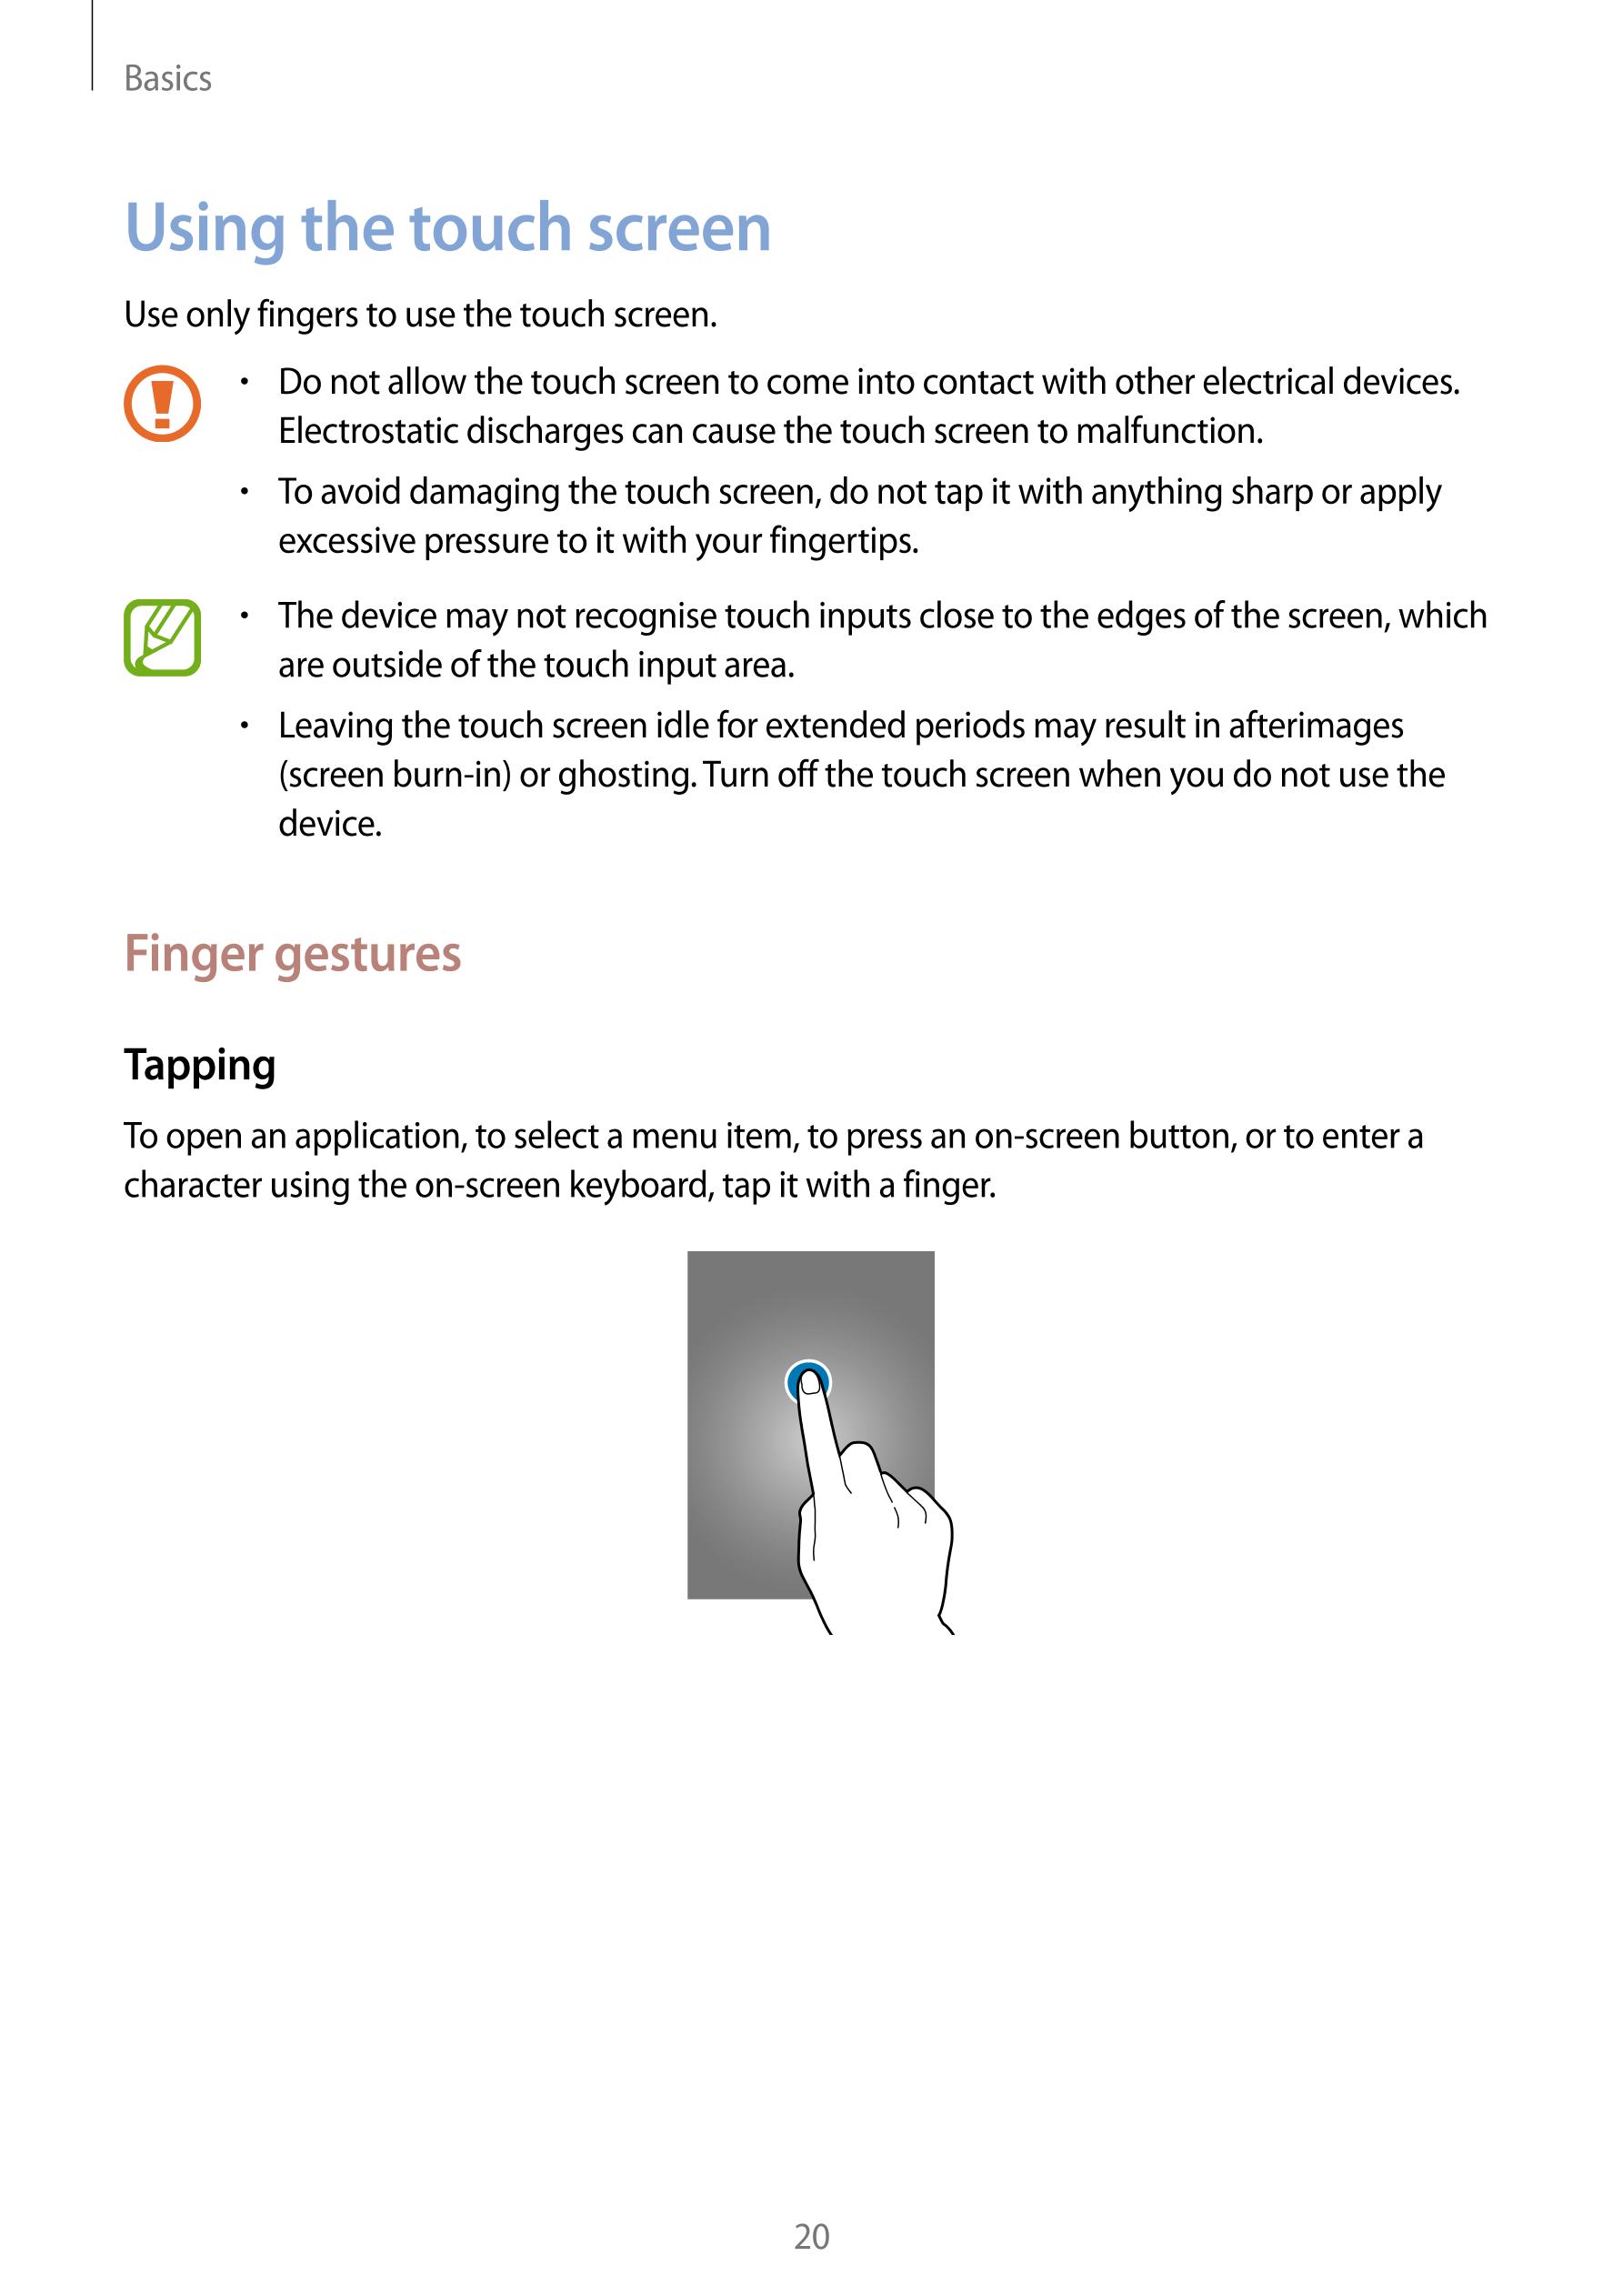 Basics
Using the touch screen
Use only fingers to use the touch screen.
•    Do not allow the touch screen to come into contact 